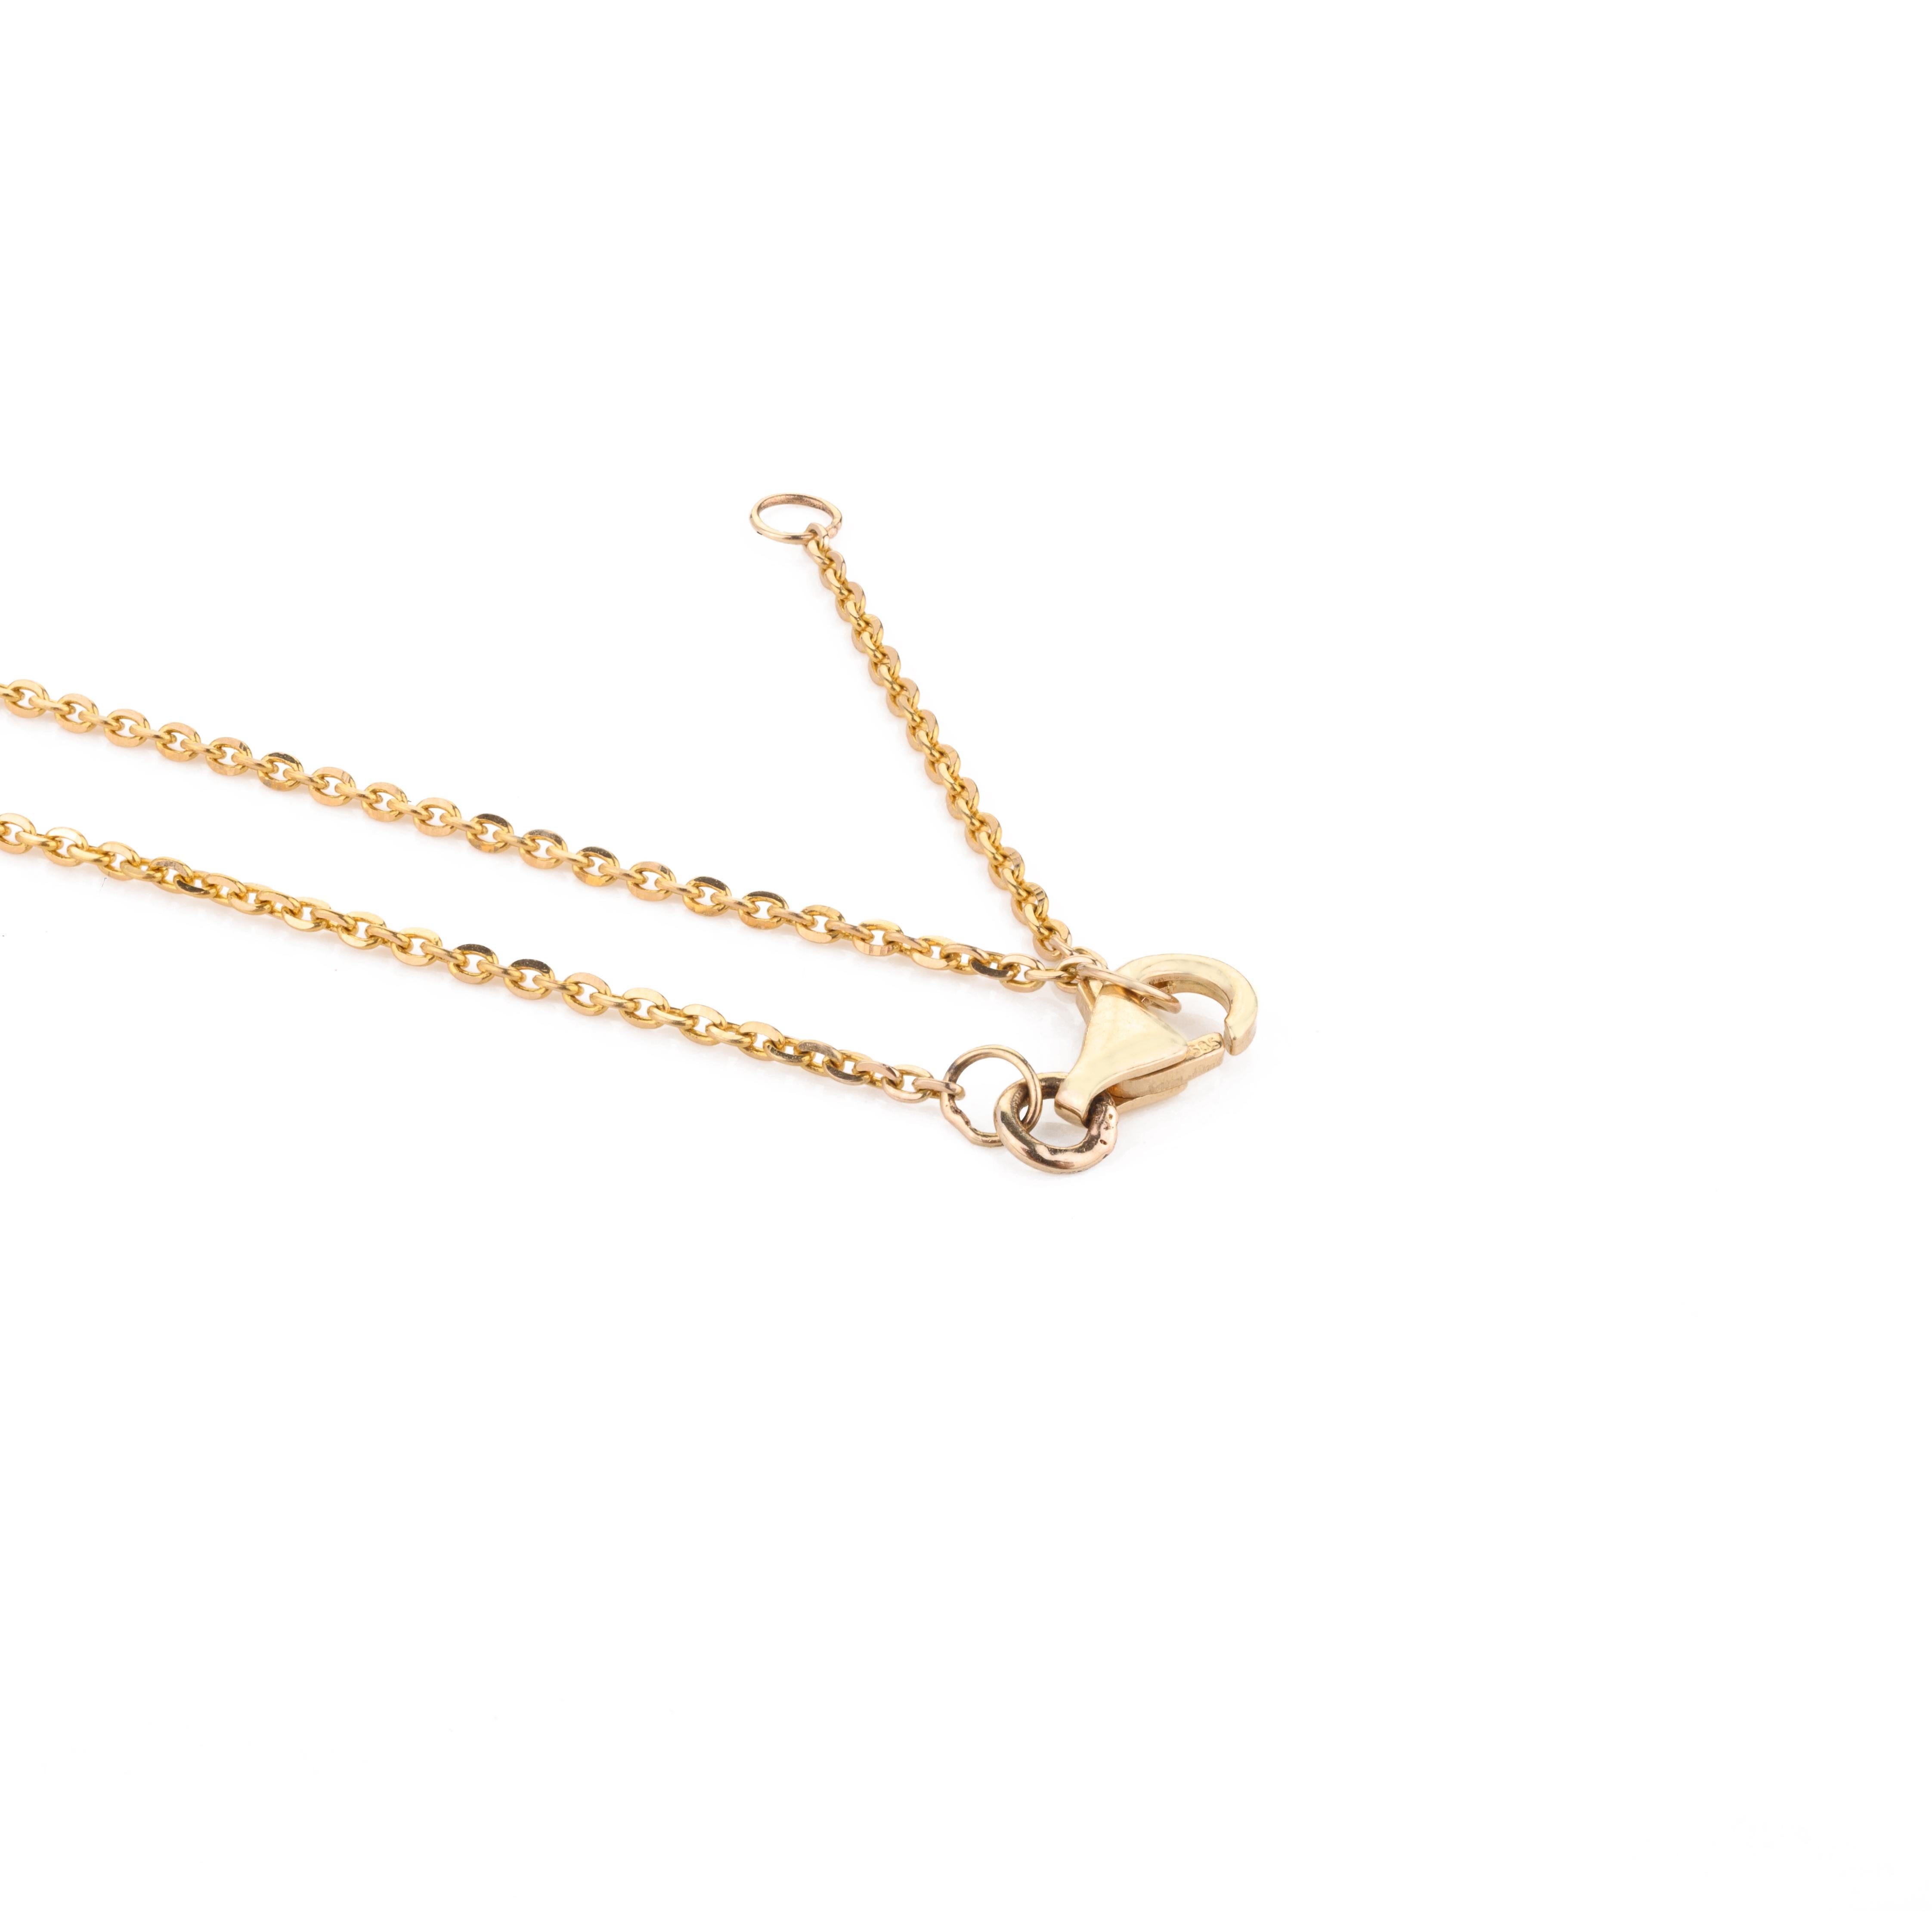 Round Cut Diamond Clover Roller Pendant Chain Necklace for Her in 14k Solid Yellow Gold